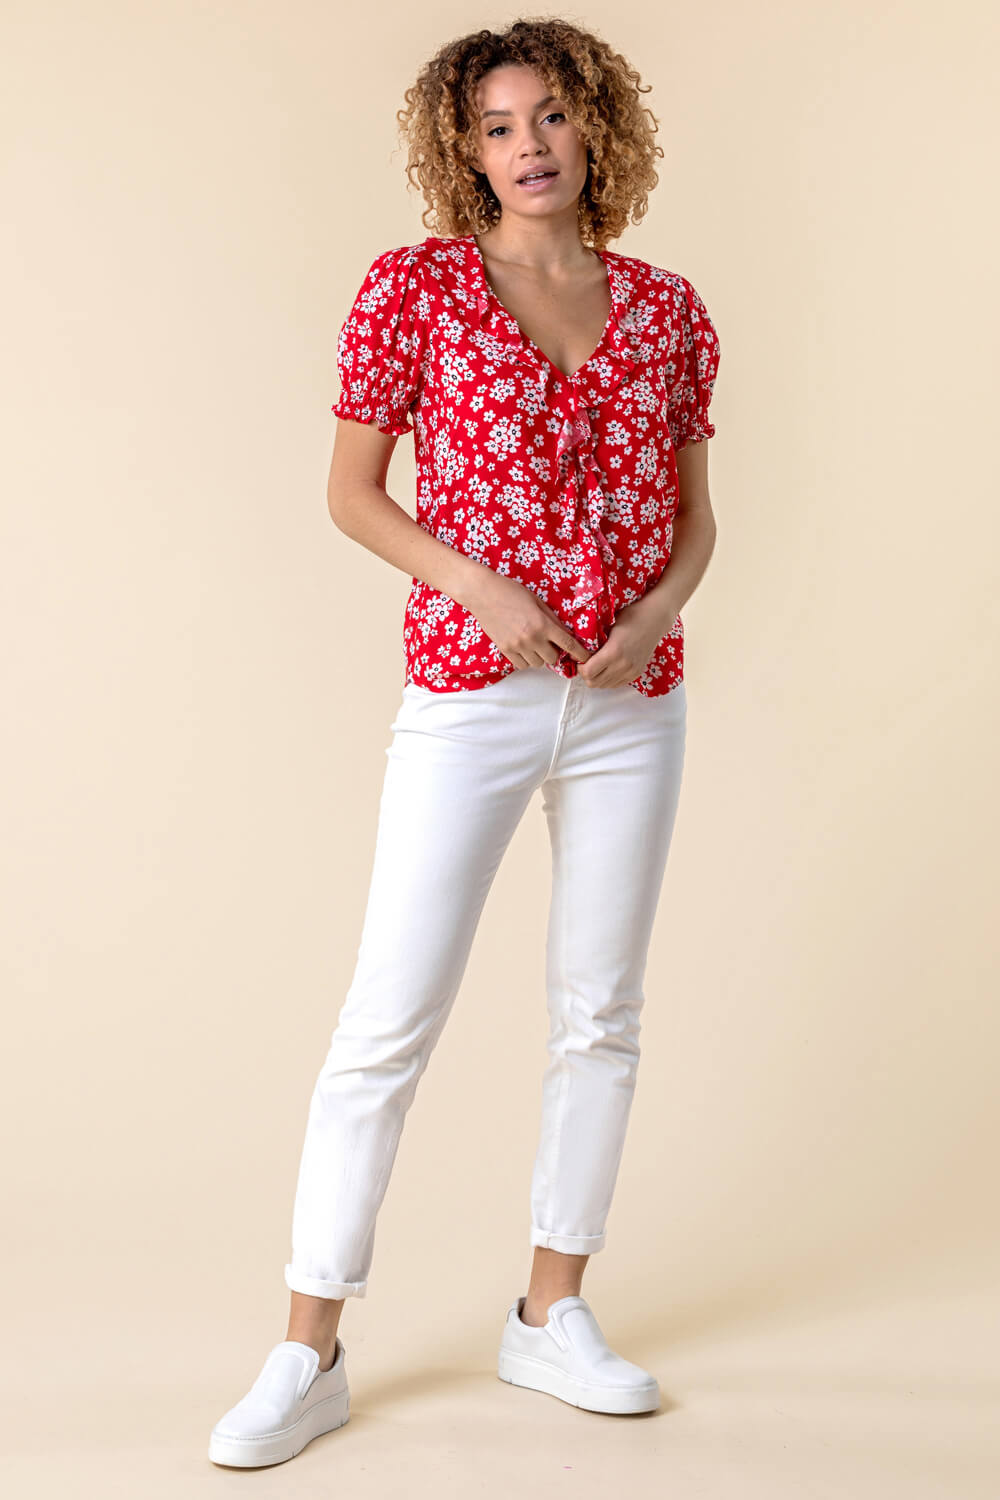 Red Floral Print Frill Detail Blouse, Image 3 of 5